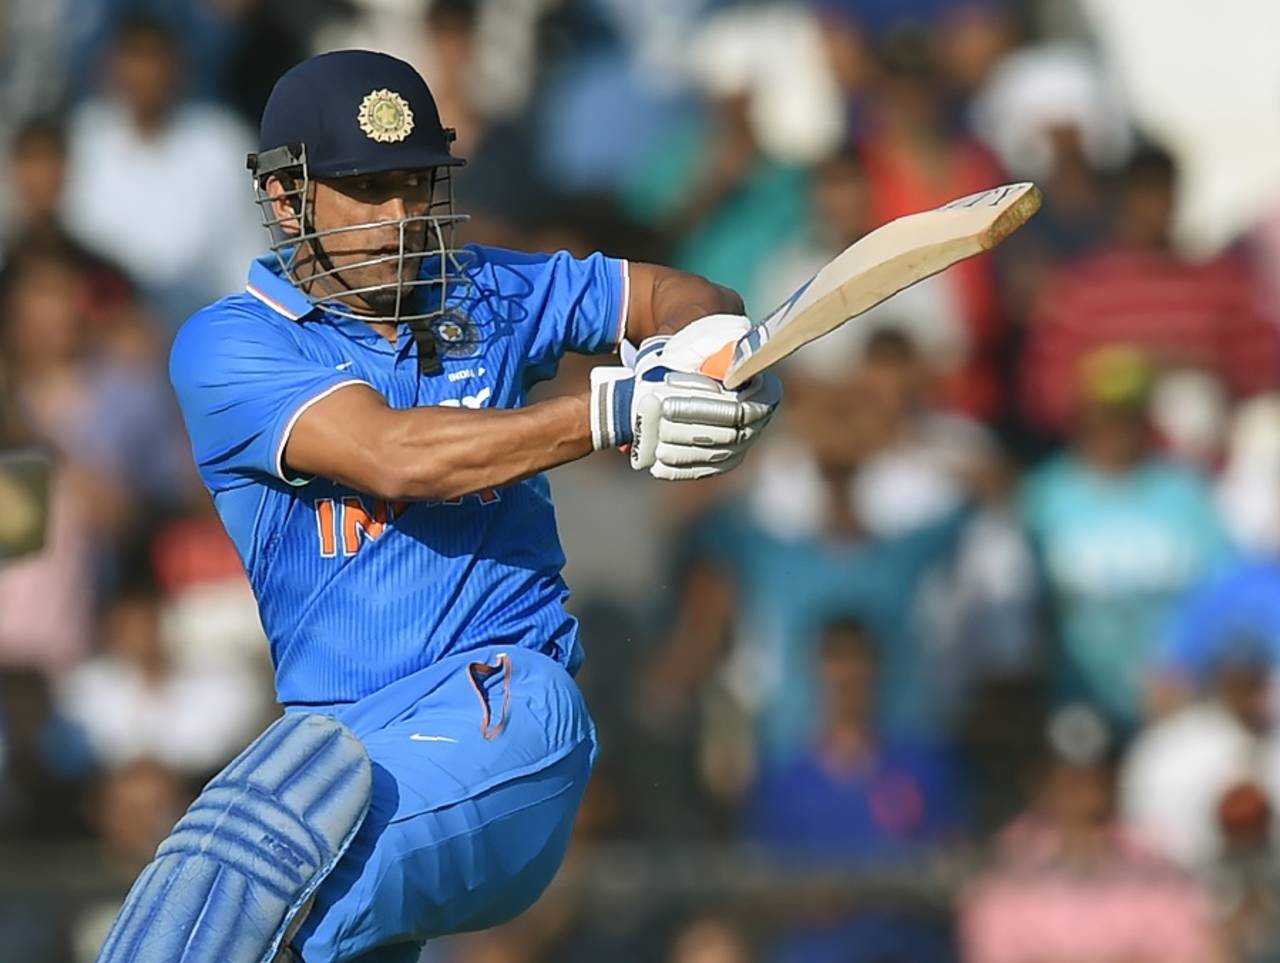 MS Dhoni provided one more fiery finish with the bat, scoring 23 off the final over to finish 68 not out in his last innings as India captain&nbsp;&nbsp;&bull;&nbsp;&nbsp;AFP